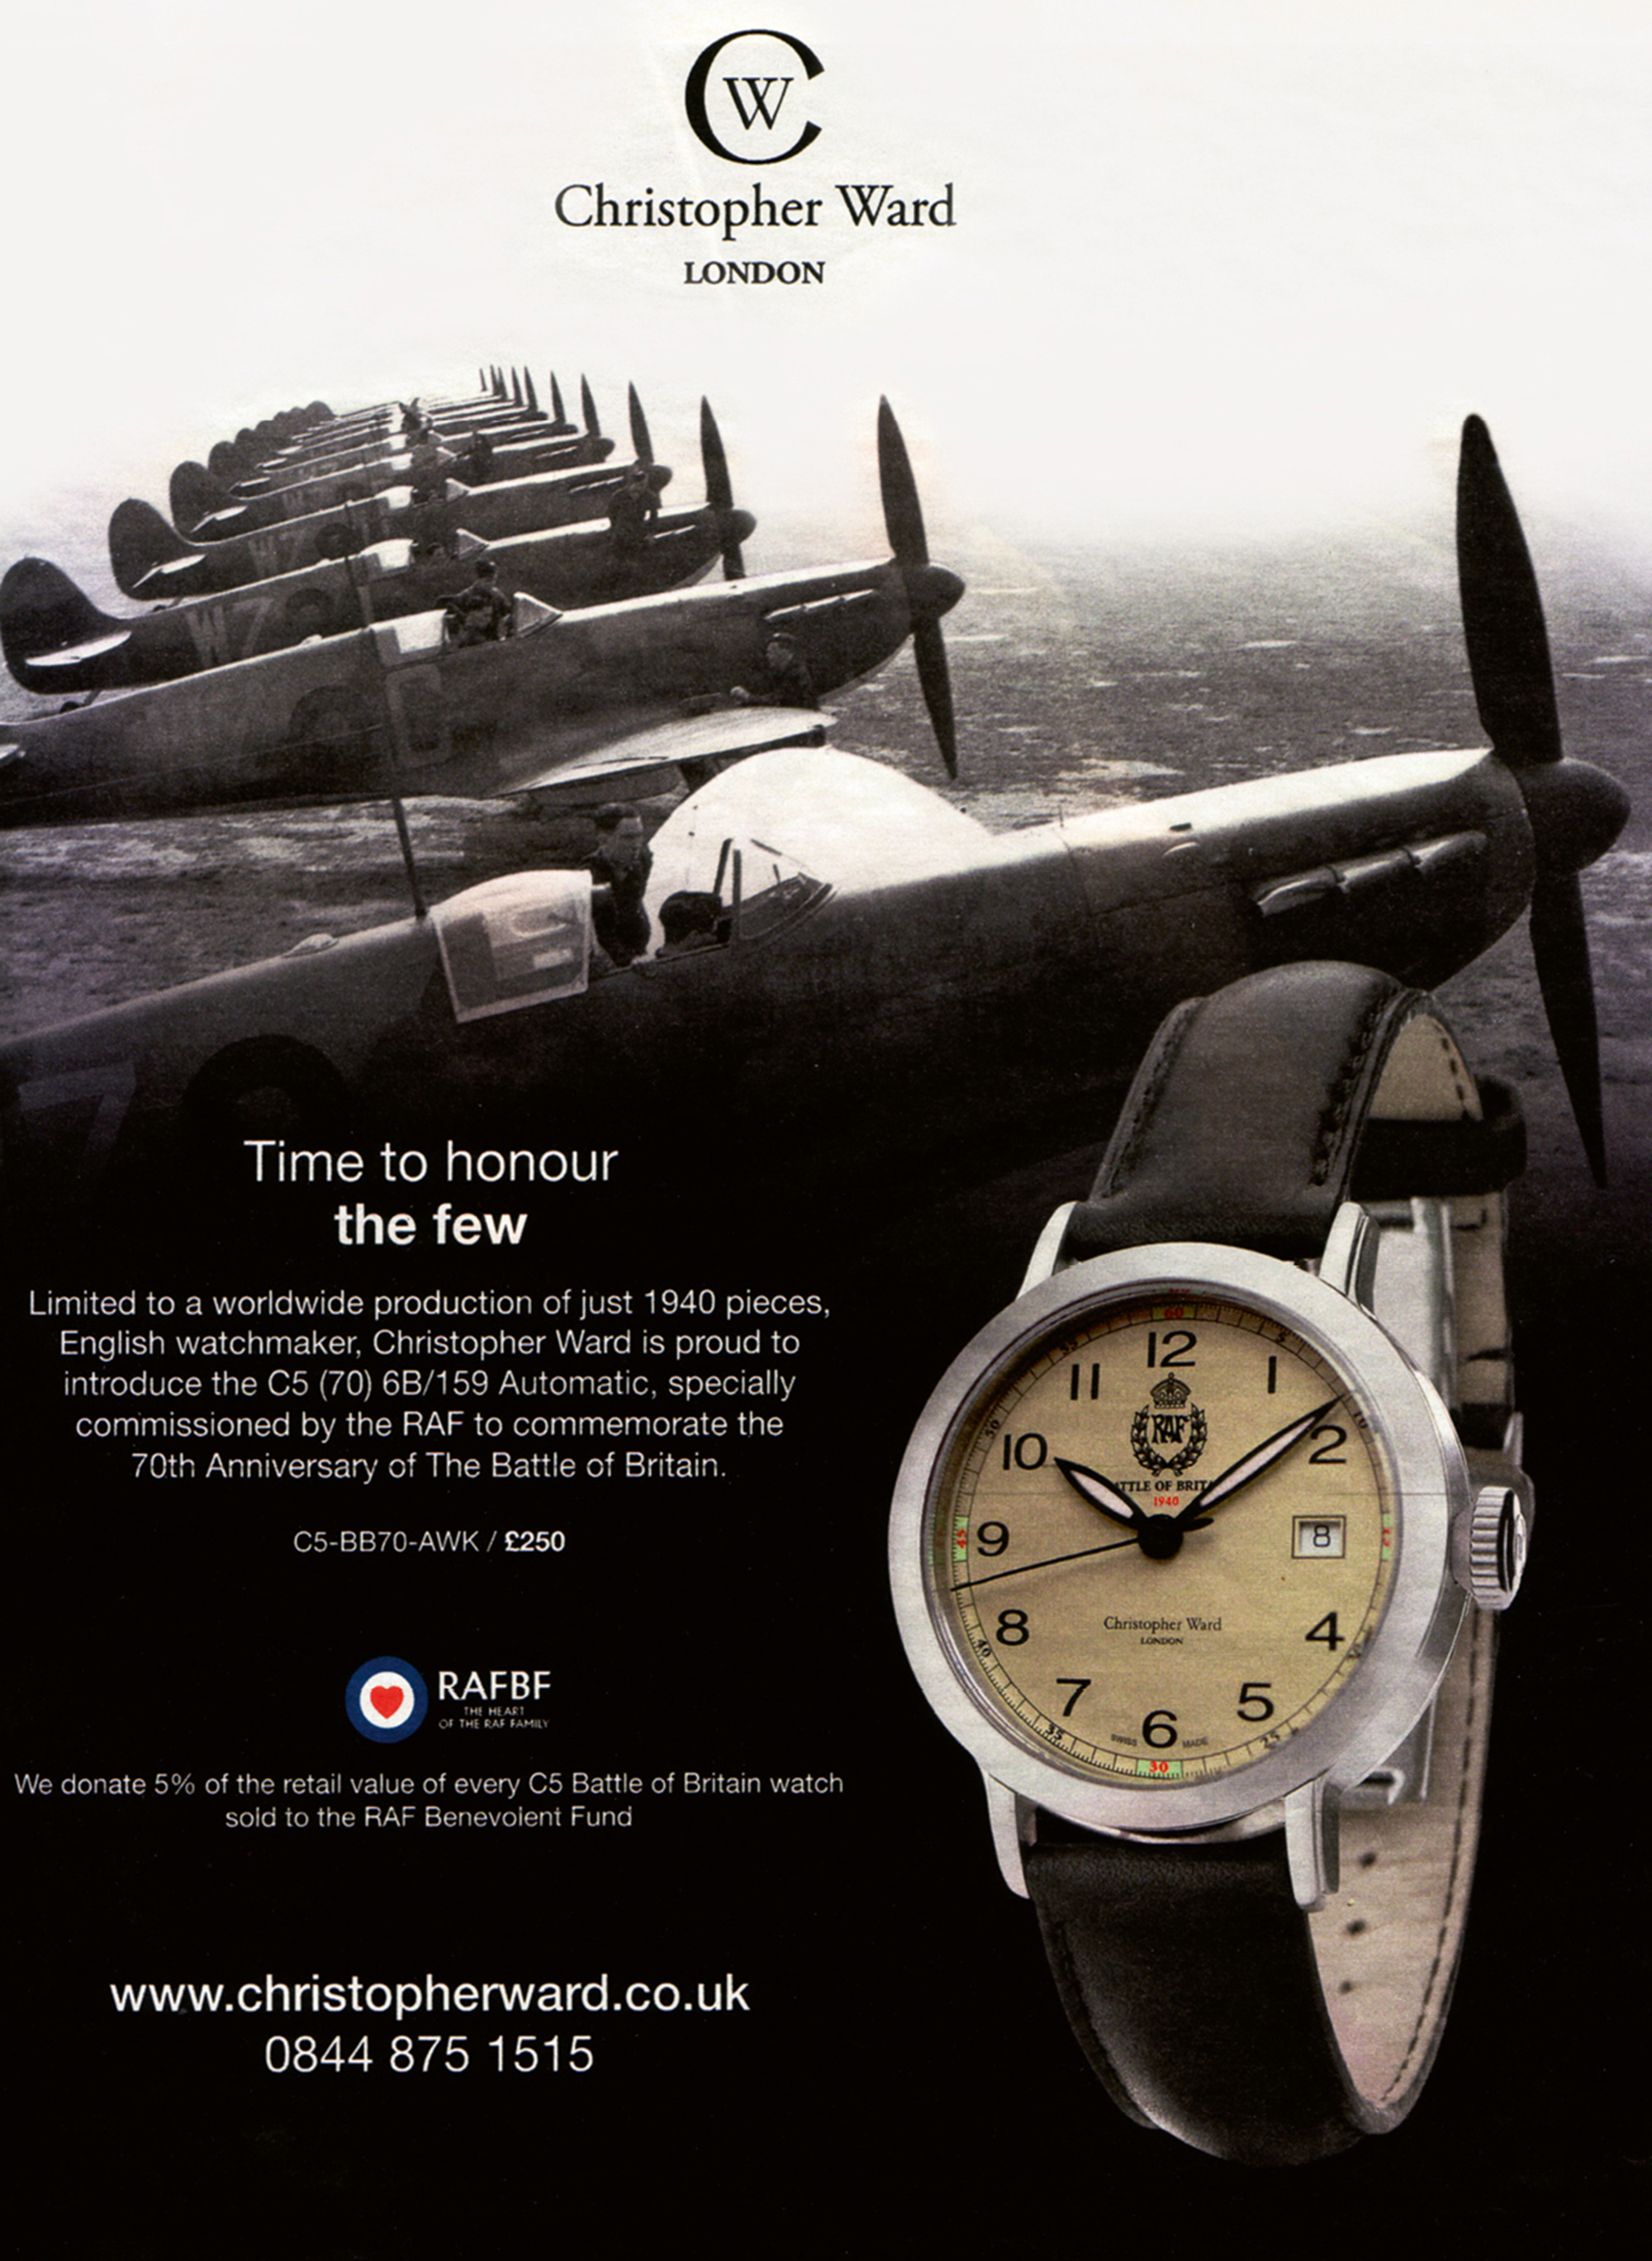 An advertisement for Christopher Ward watches depicting the watch in front of military planes.